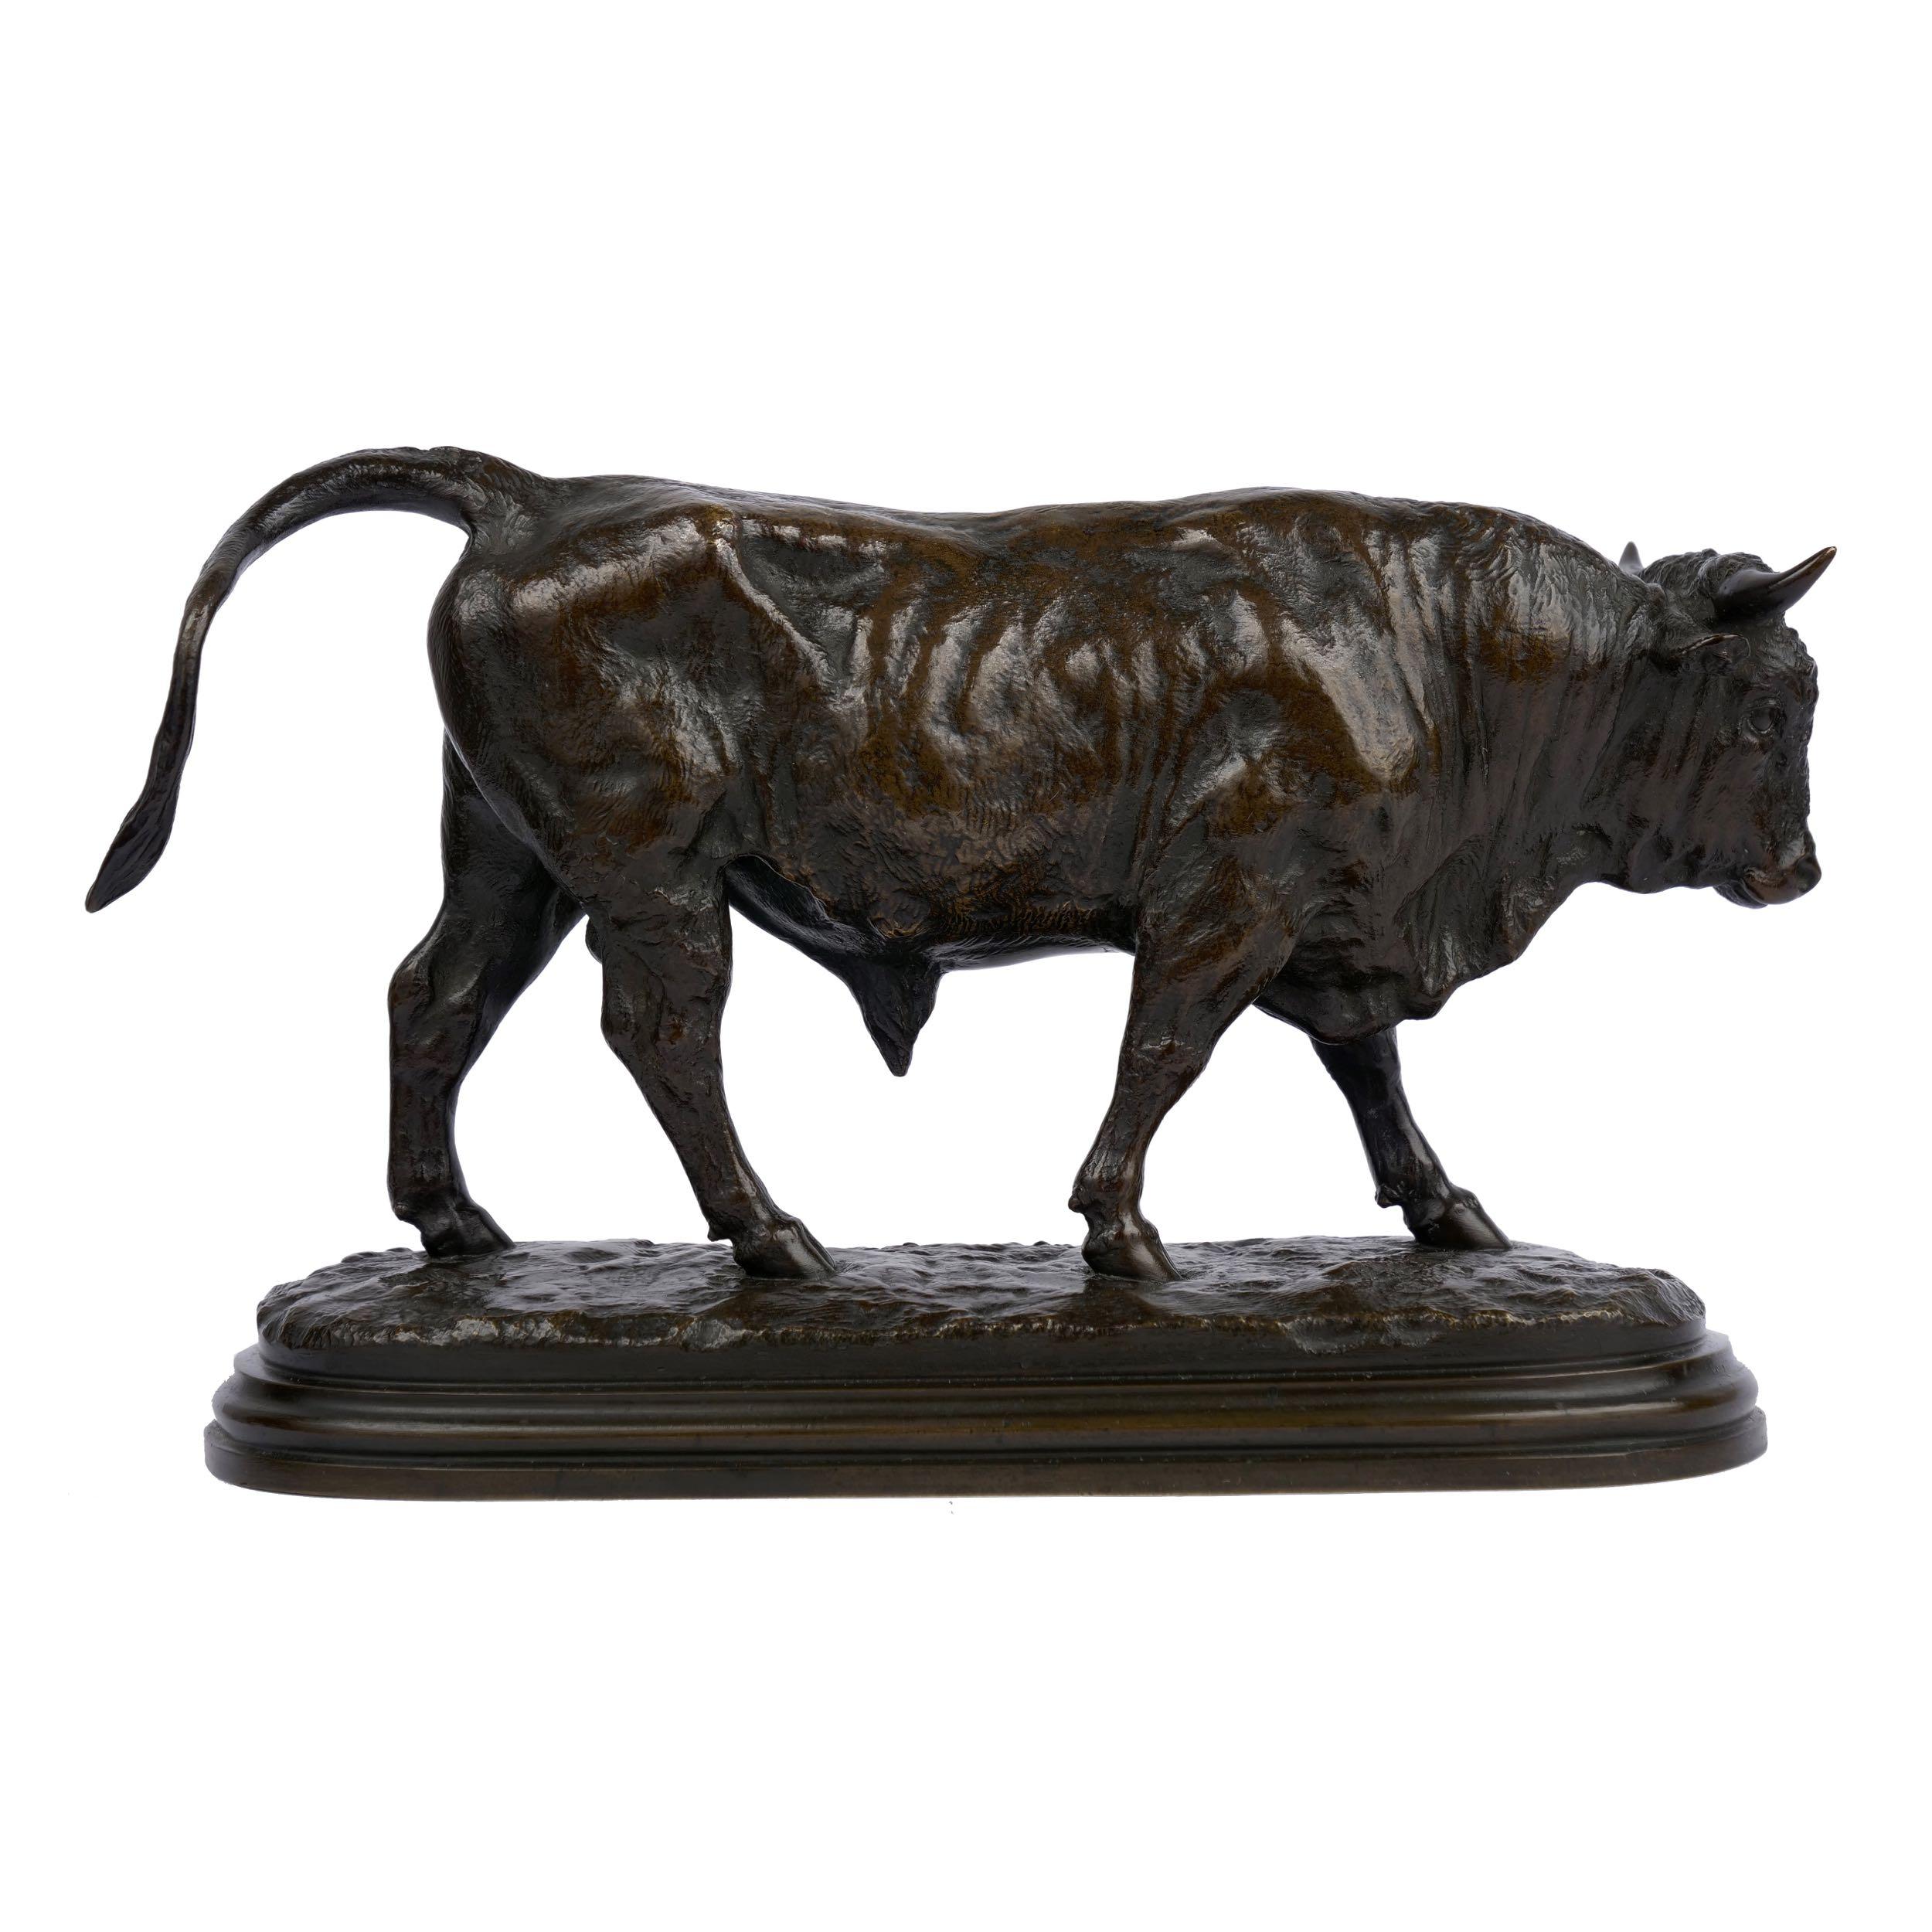 A rare and fine sculpture that is extensively documented in the relatively small body of Rosa Bonheur’s work in bronze, the model captures a Striding Bull over a naturalistic base. A treacherous and powerful animal, he is portrayed as a lean and